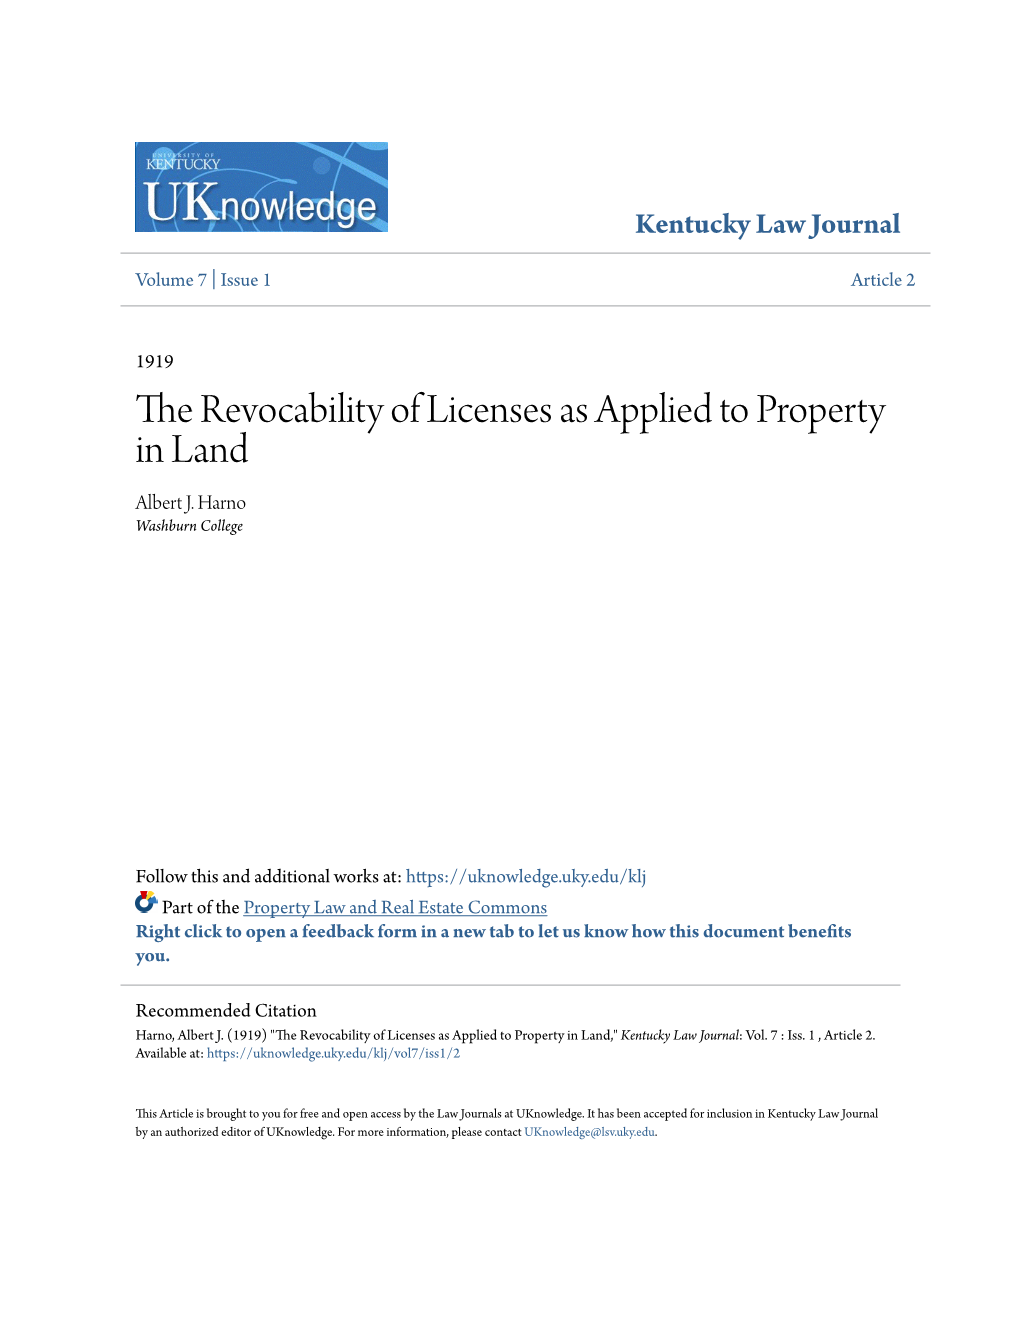 The Revocability of Licenses As Applied to Property in Land Albert J